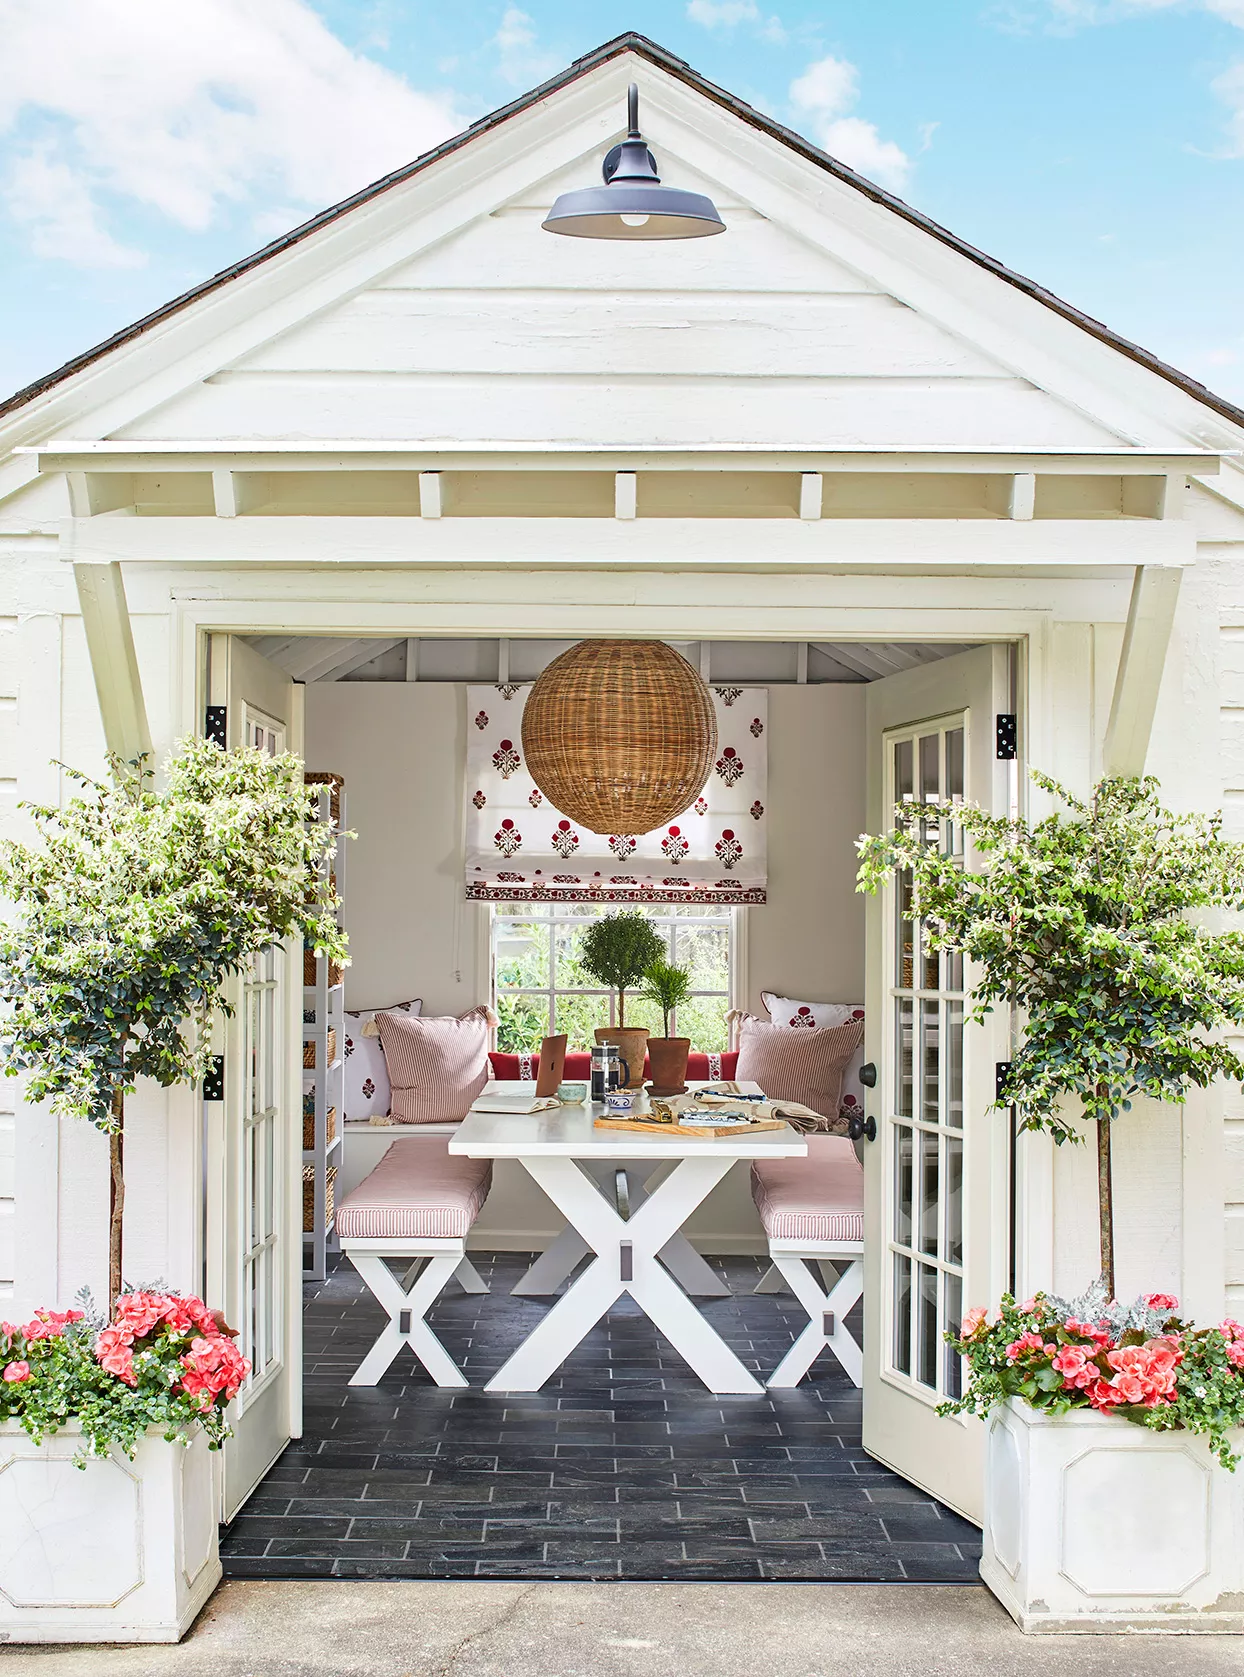 garage-turned-office entertaining shed french doors dining seating